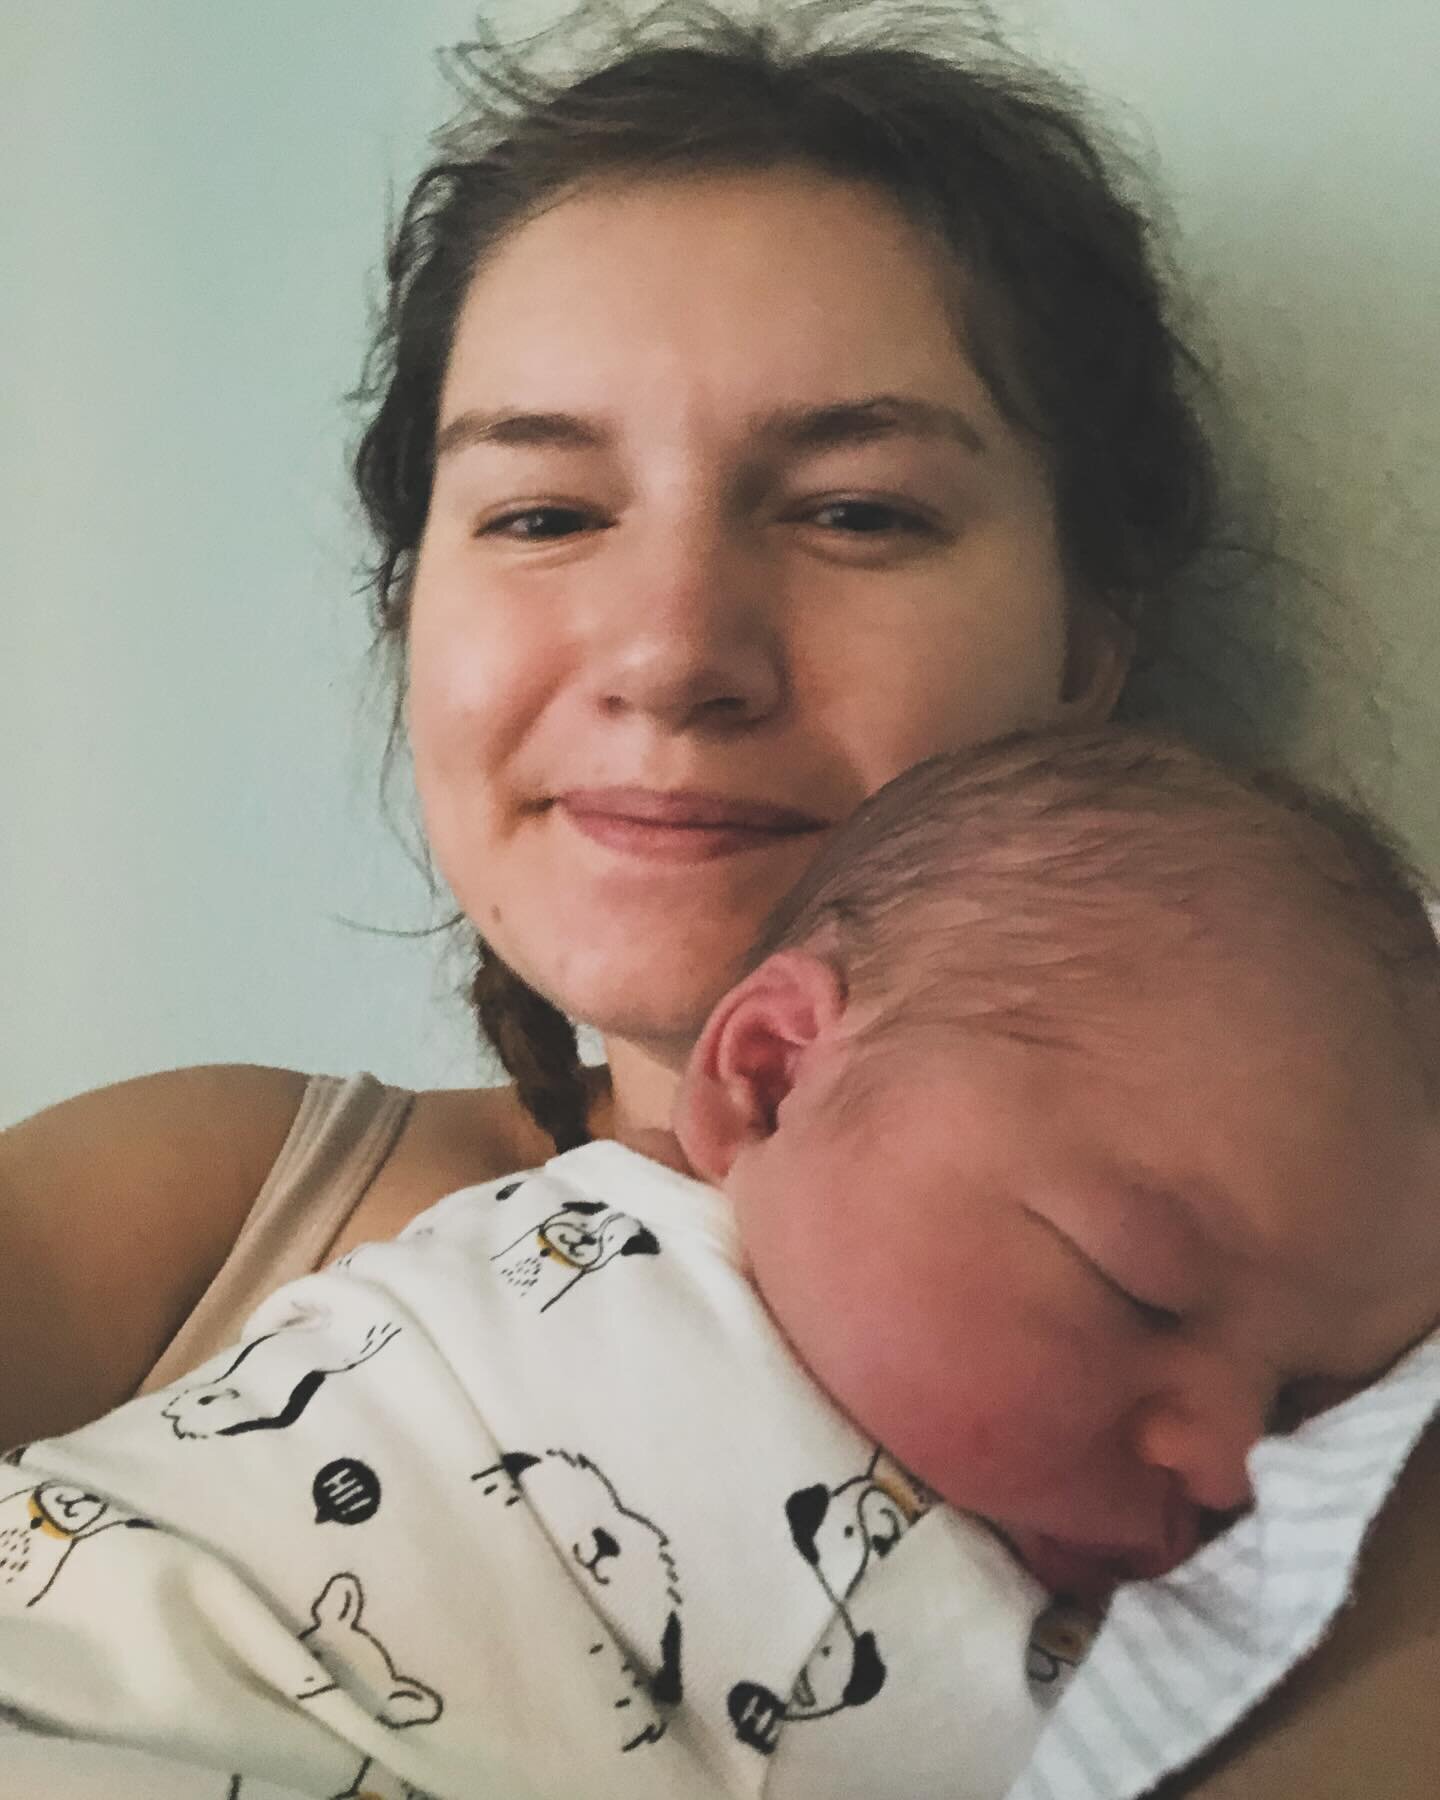 What&rsquo;s it like to wake up for the first time as a mom?

Well first of all you&rsquo;re probably waking up at 2am and 4am and 6am and then for the day at 8am. 
You feel warm and wet and squishy. Everything feels loose too. Like maybe that little